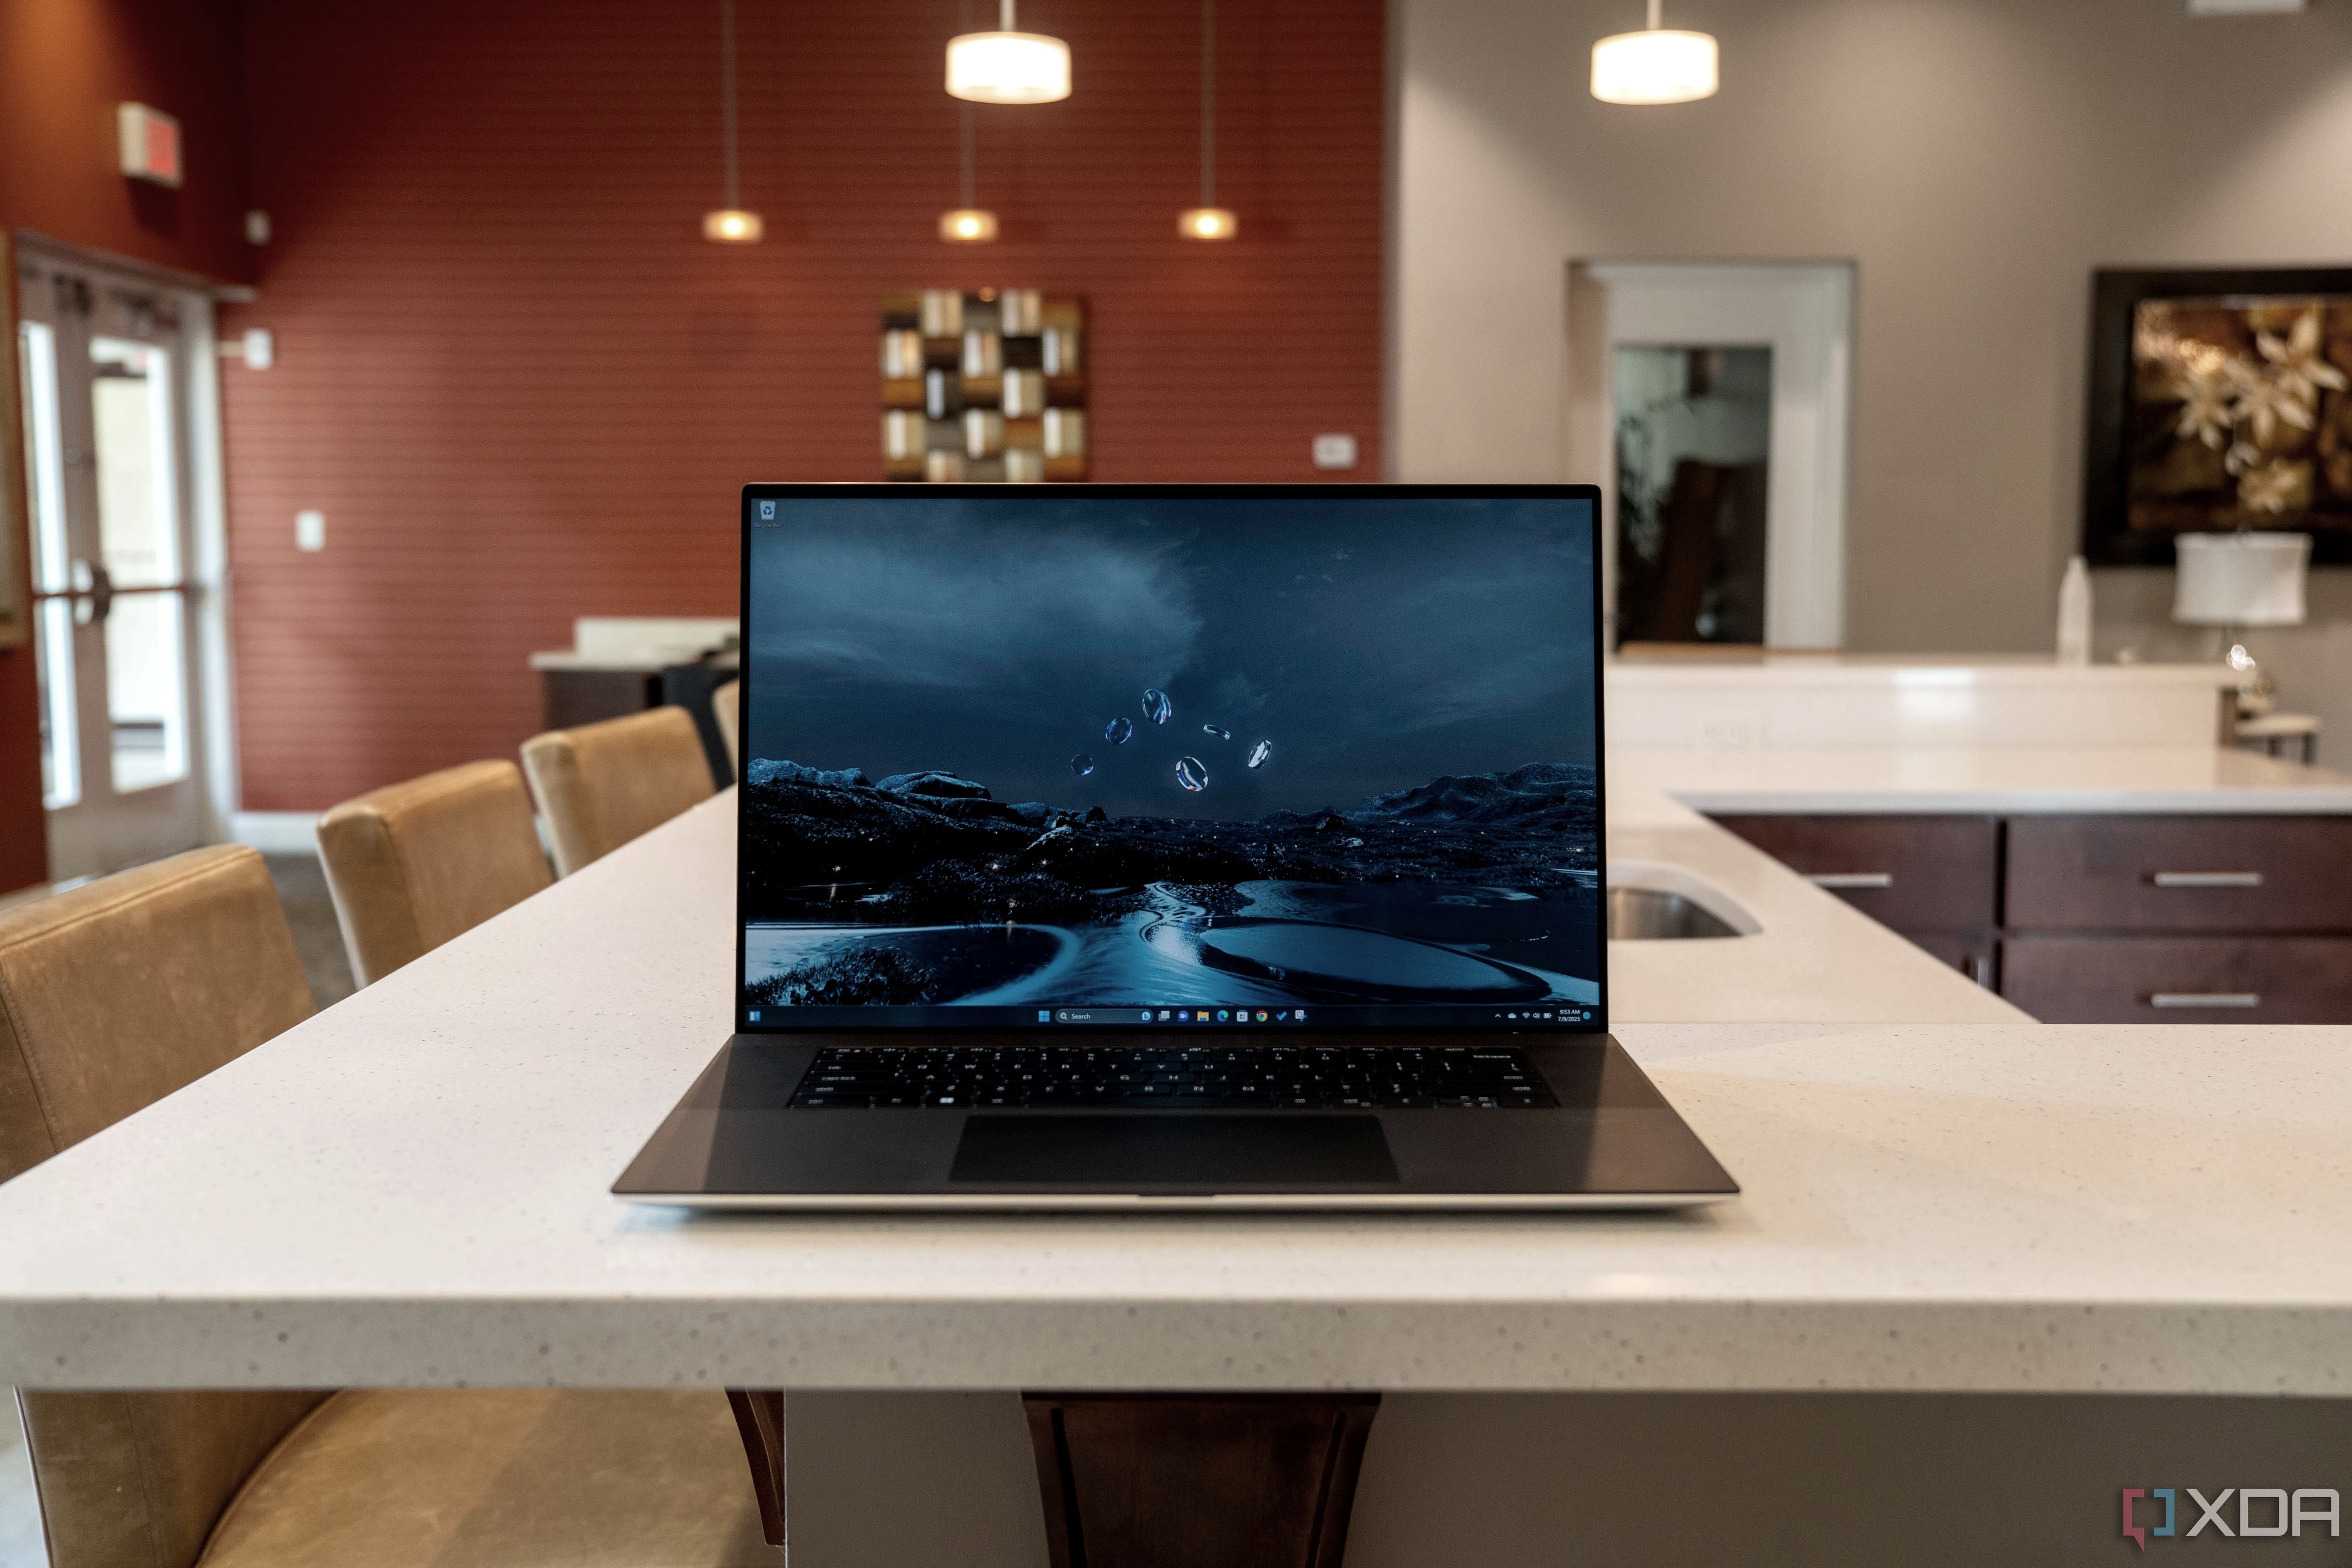 Front view of the Dell XPS 17 laptop on a marble countertop